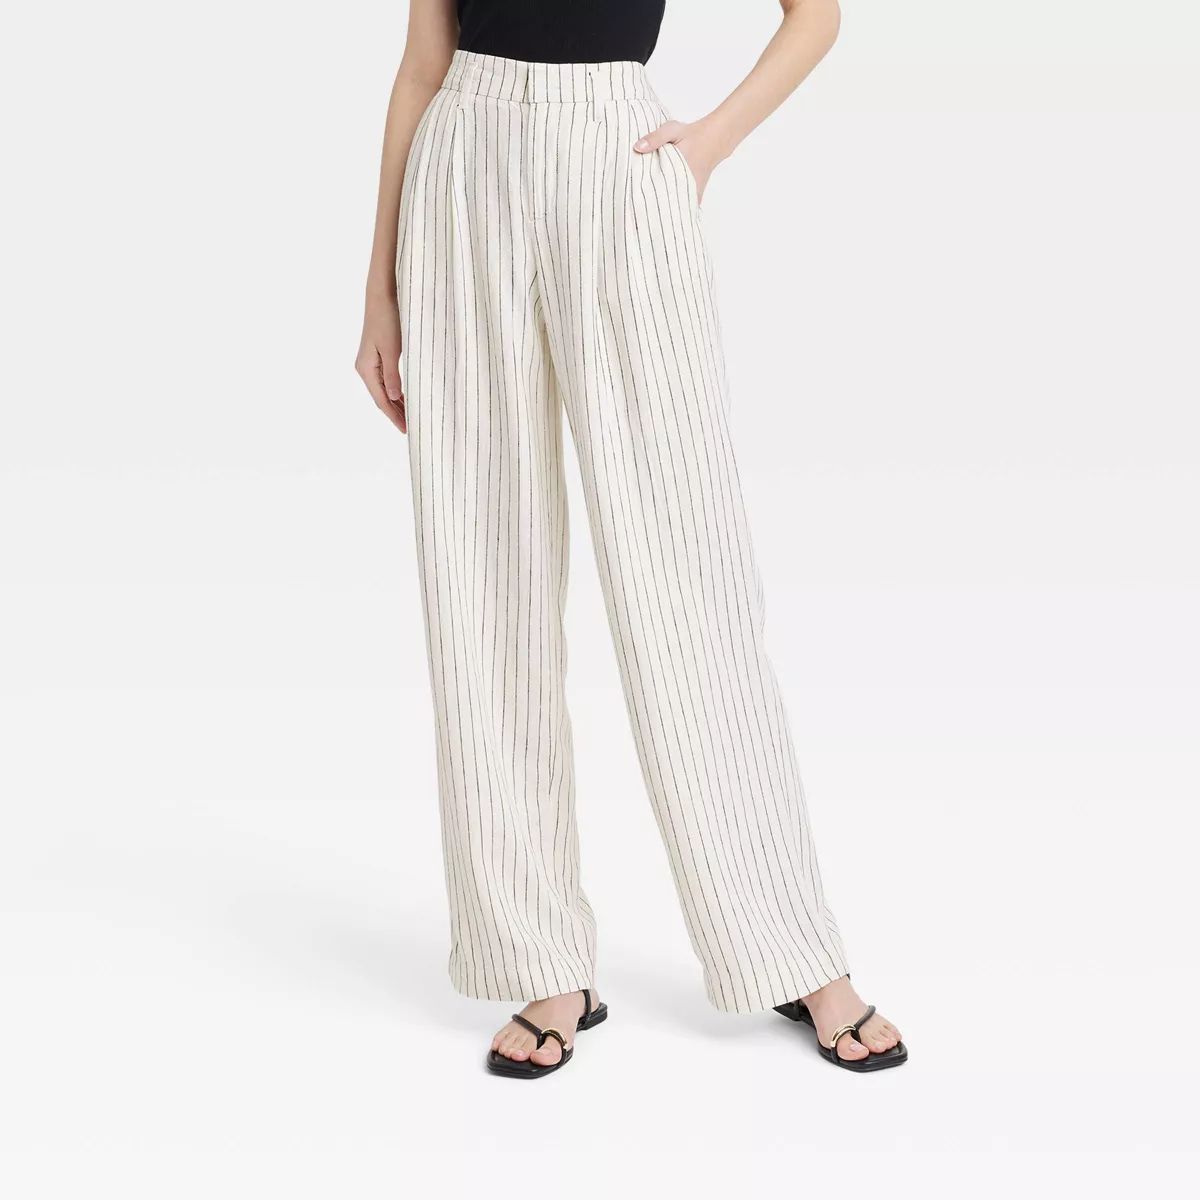 Women's High-Rise Linen Pleated Front Straight Pants - A New Day™ Cream/Black Pinstripe 12 Long | Target